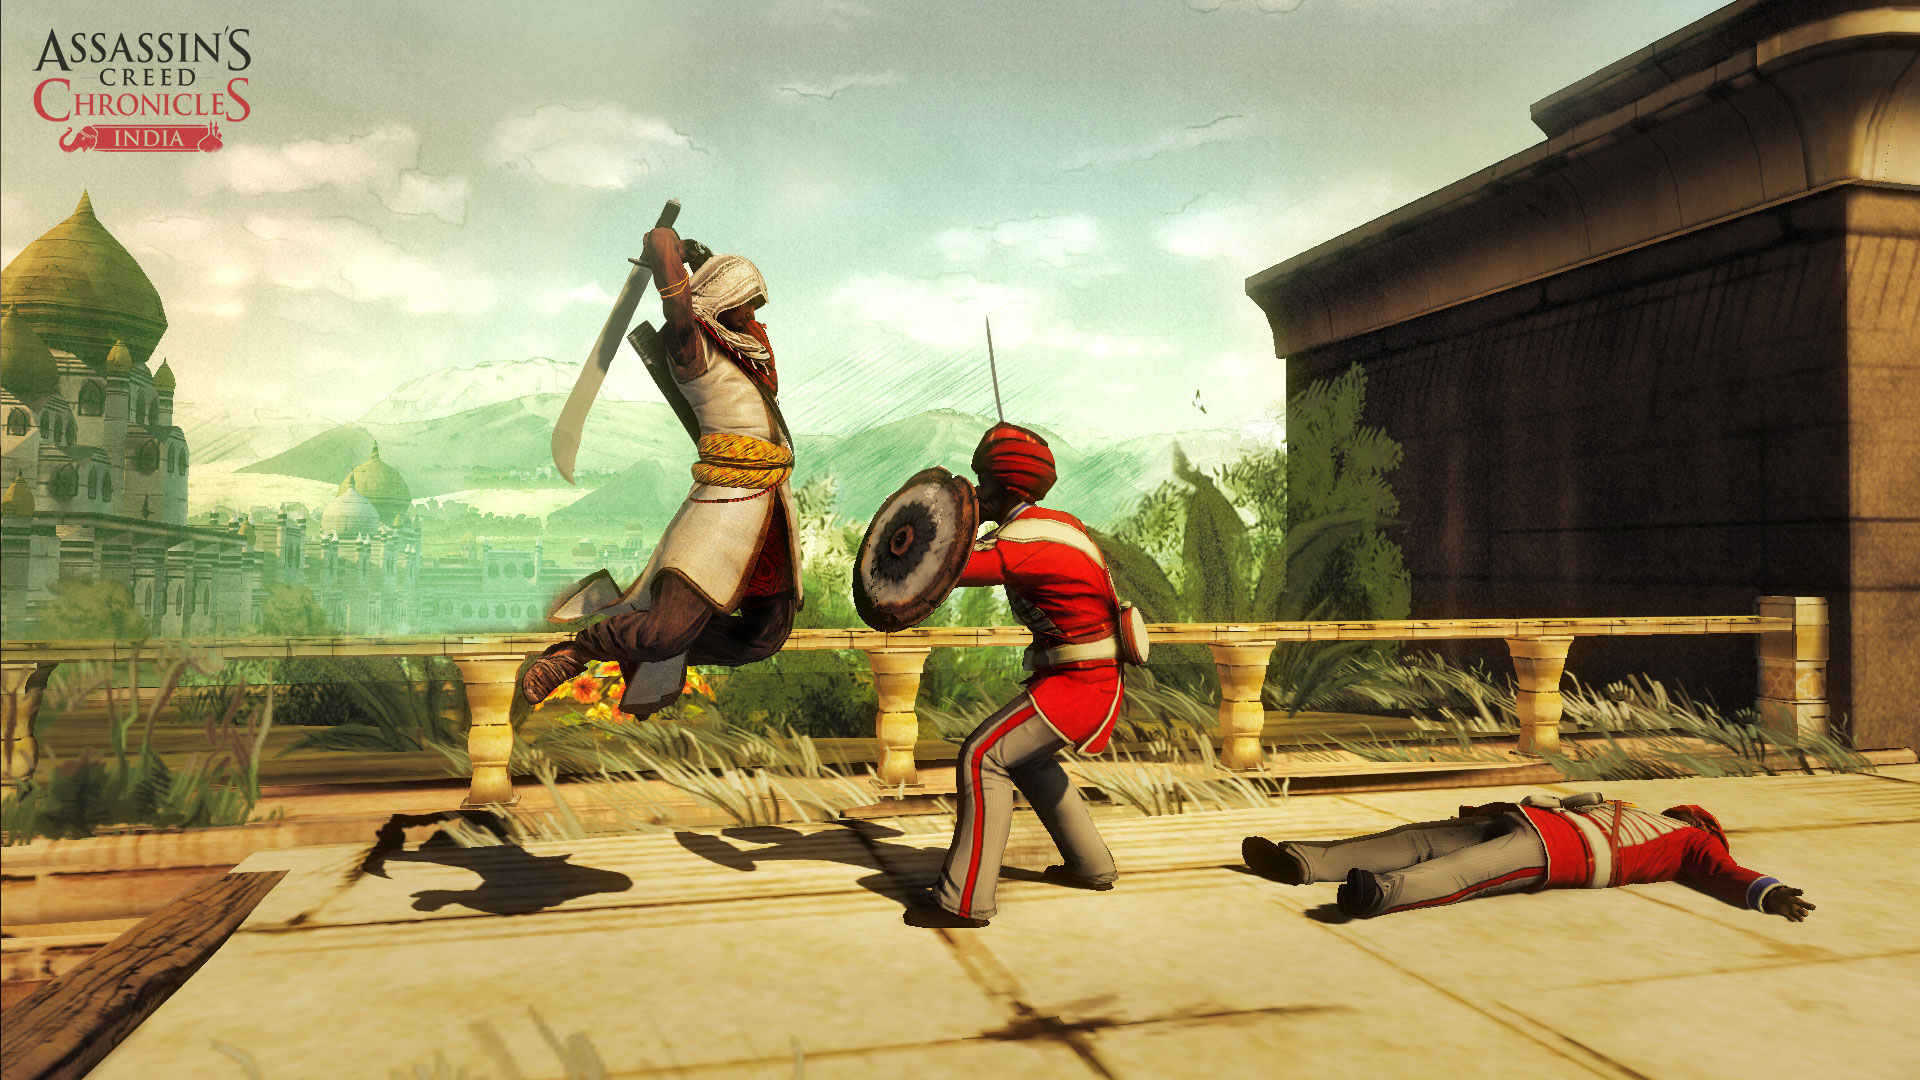 HD Quality Wallpaper | Collection: Video Game, 1920x1080 Assassin's Creed Chronicles